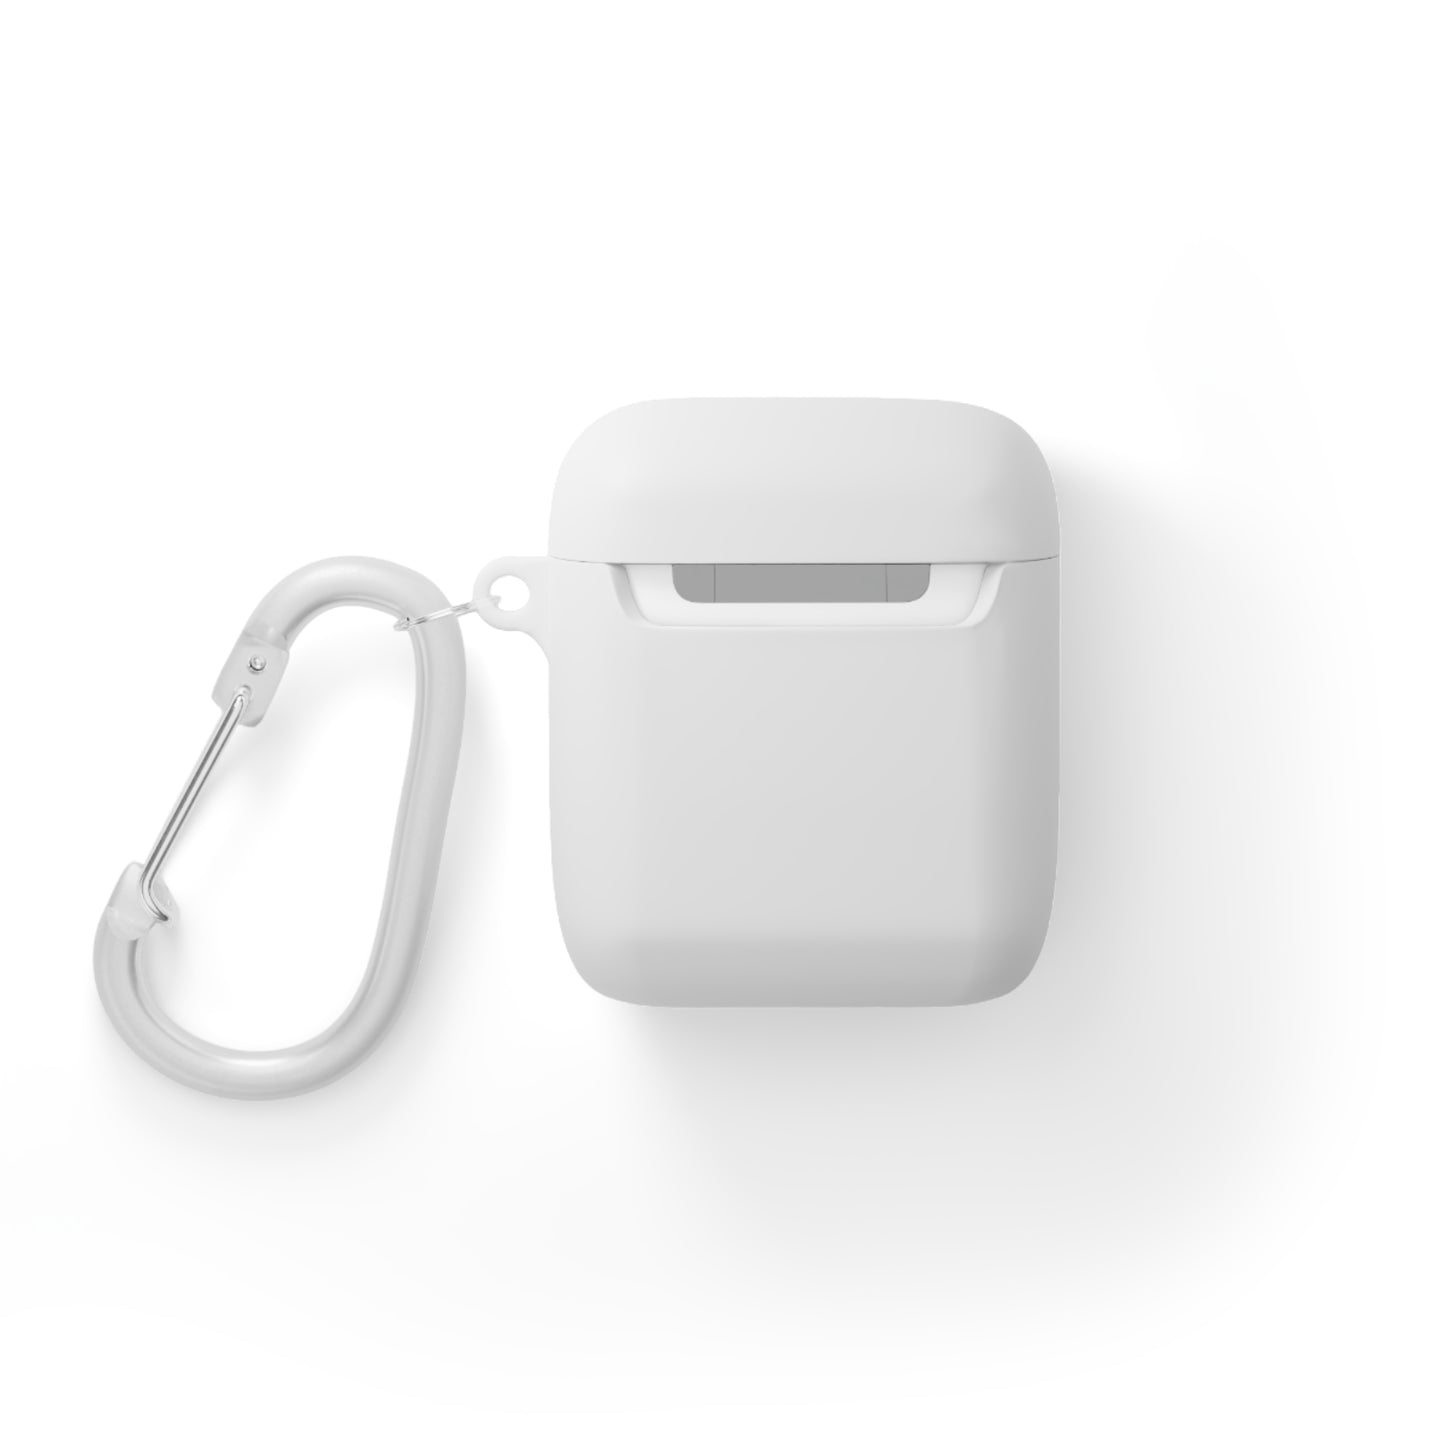 RC Aubenas AirPods and AirPods Pro Case Cover